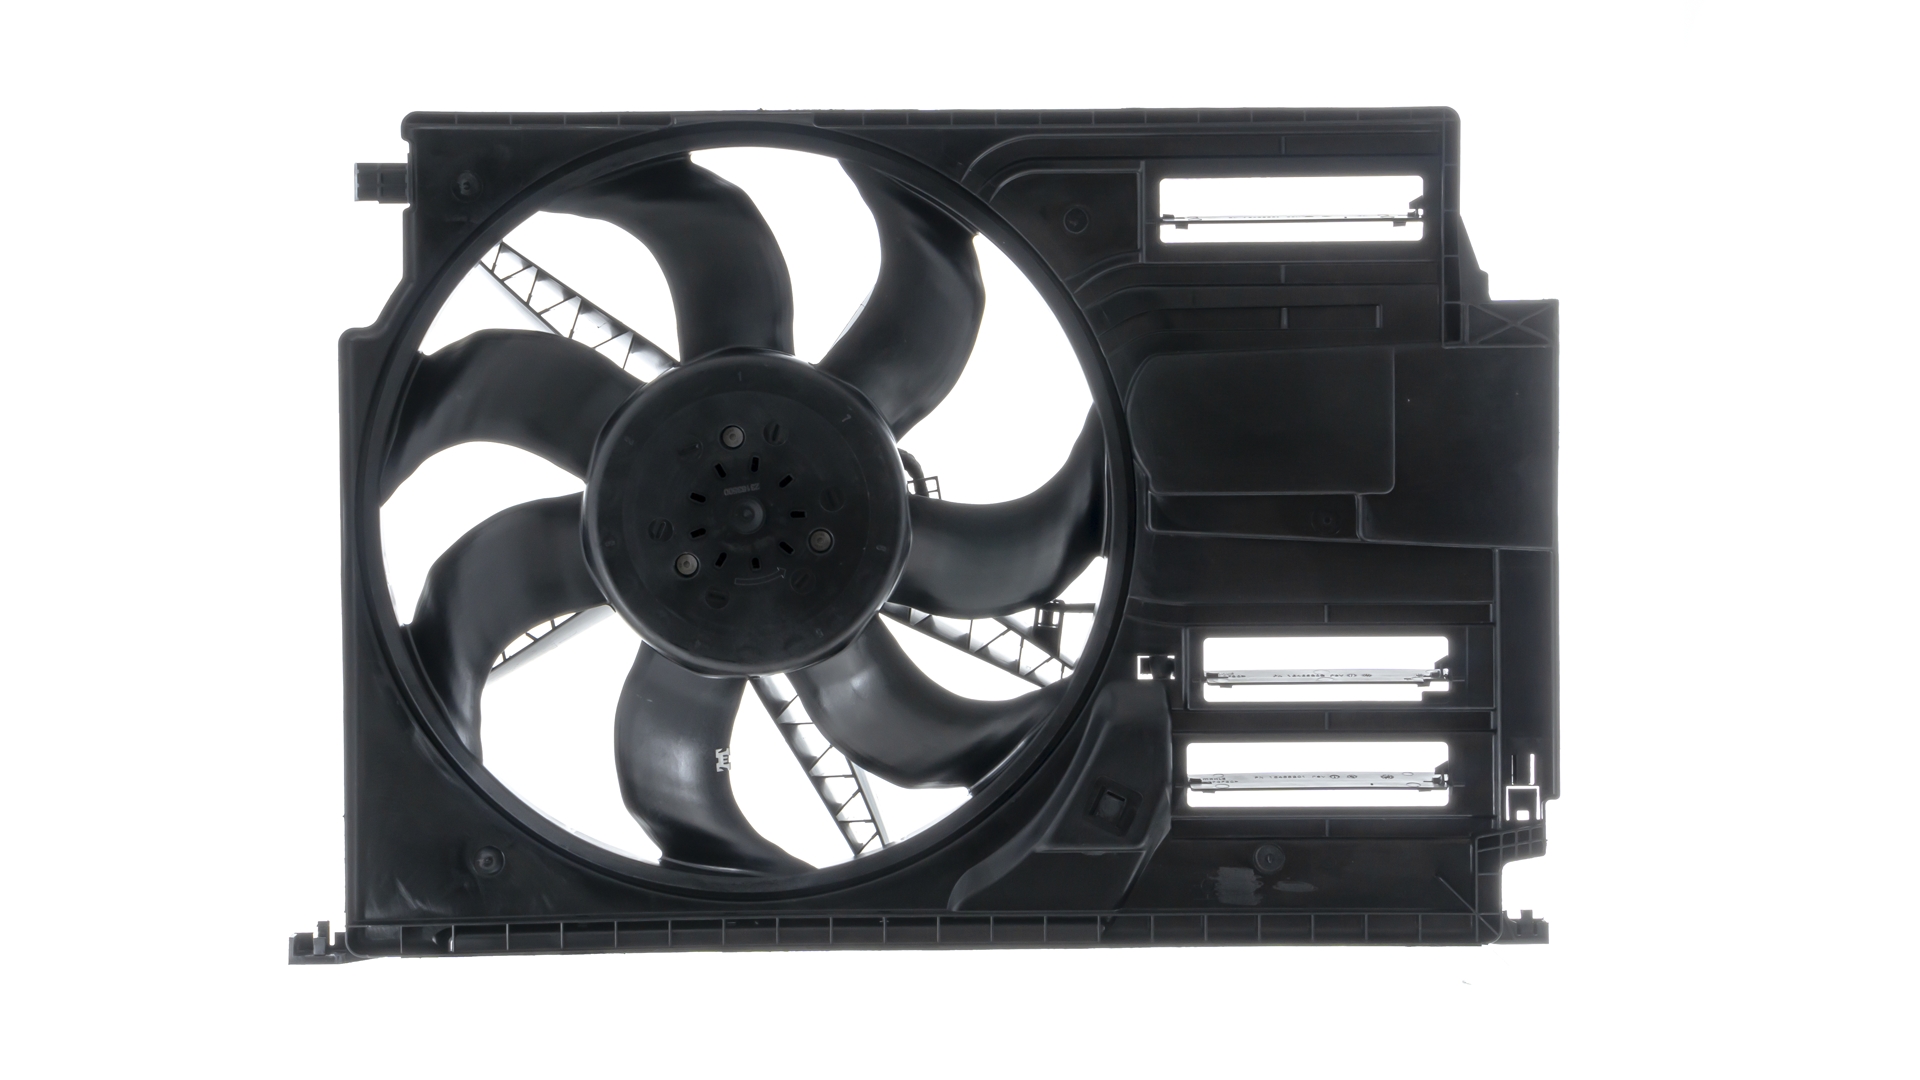 Original MAHLE ORIGINAL 351151091 Cooling fan assembly CFF 404 000P for BMW 1 Series